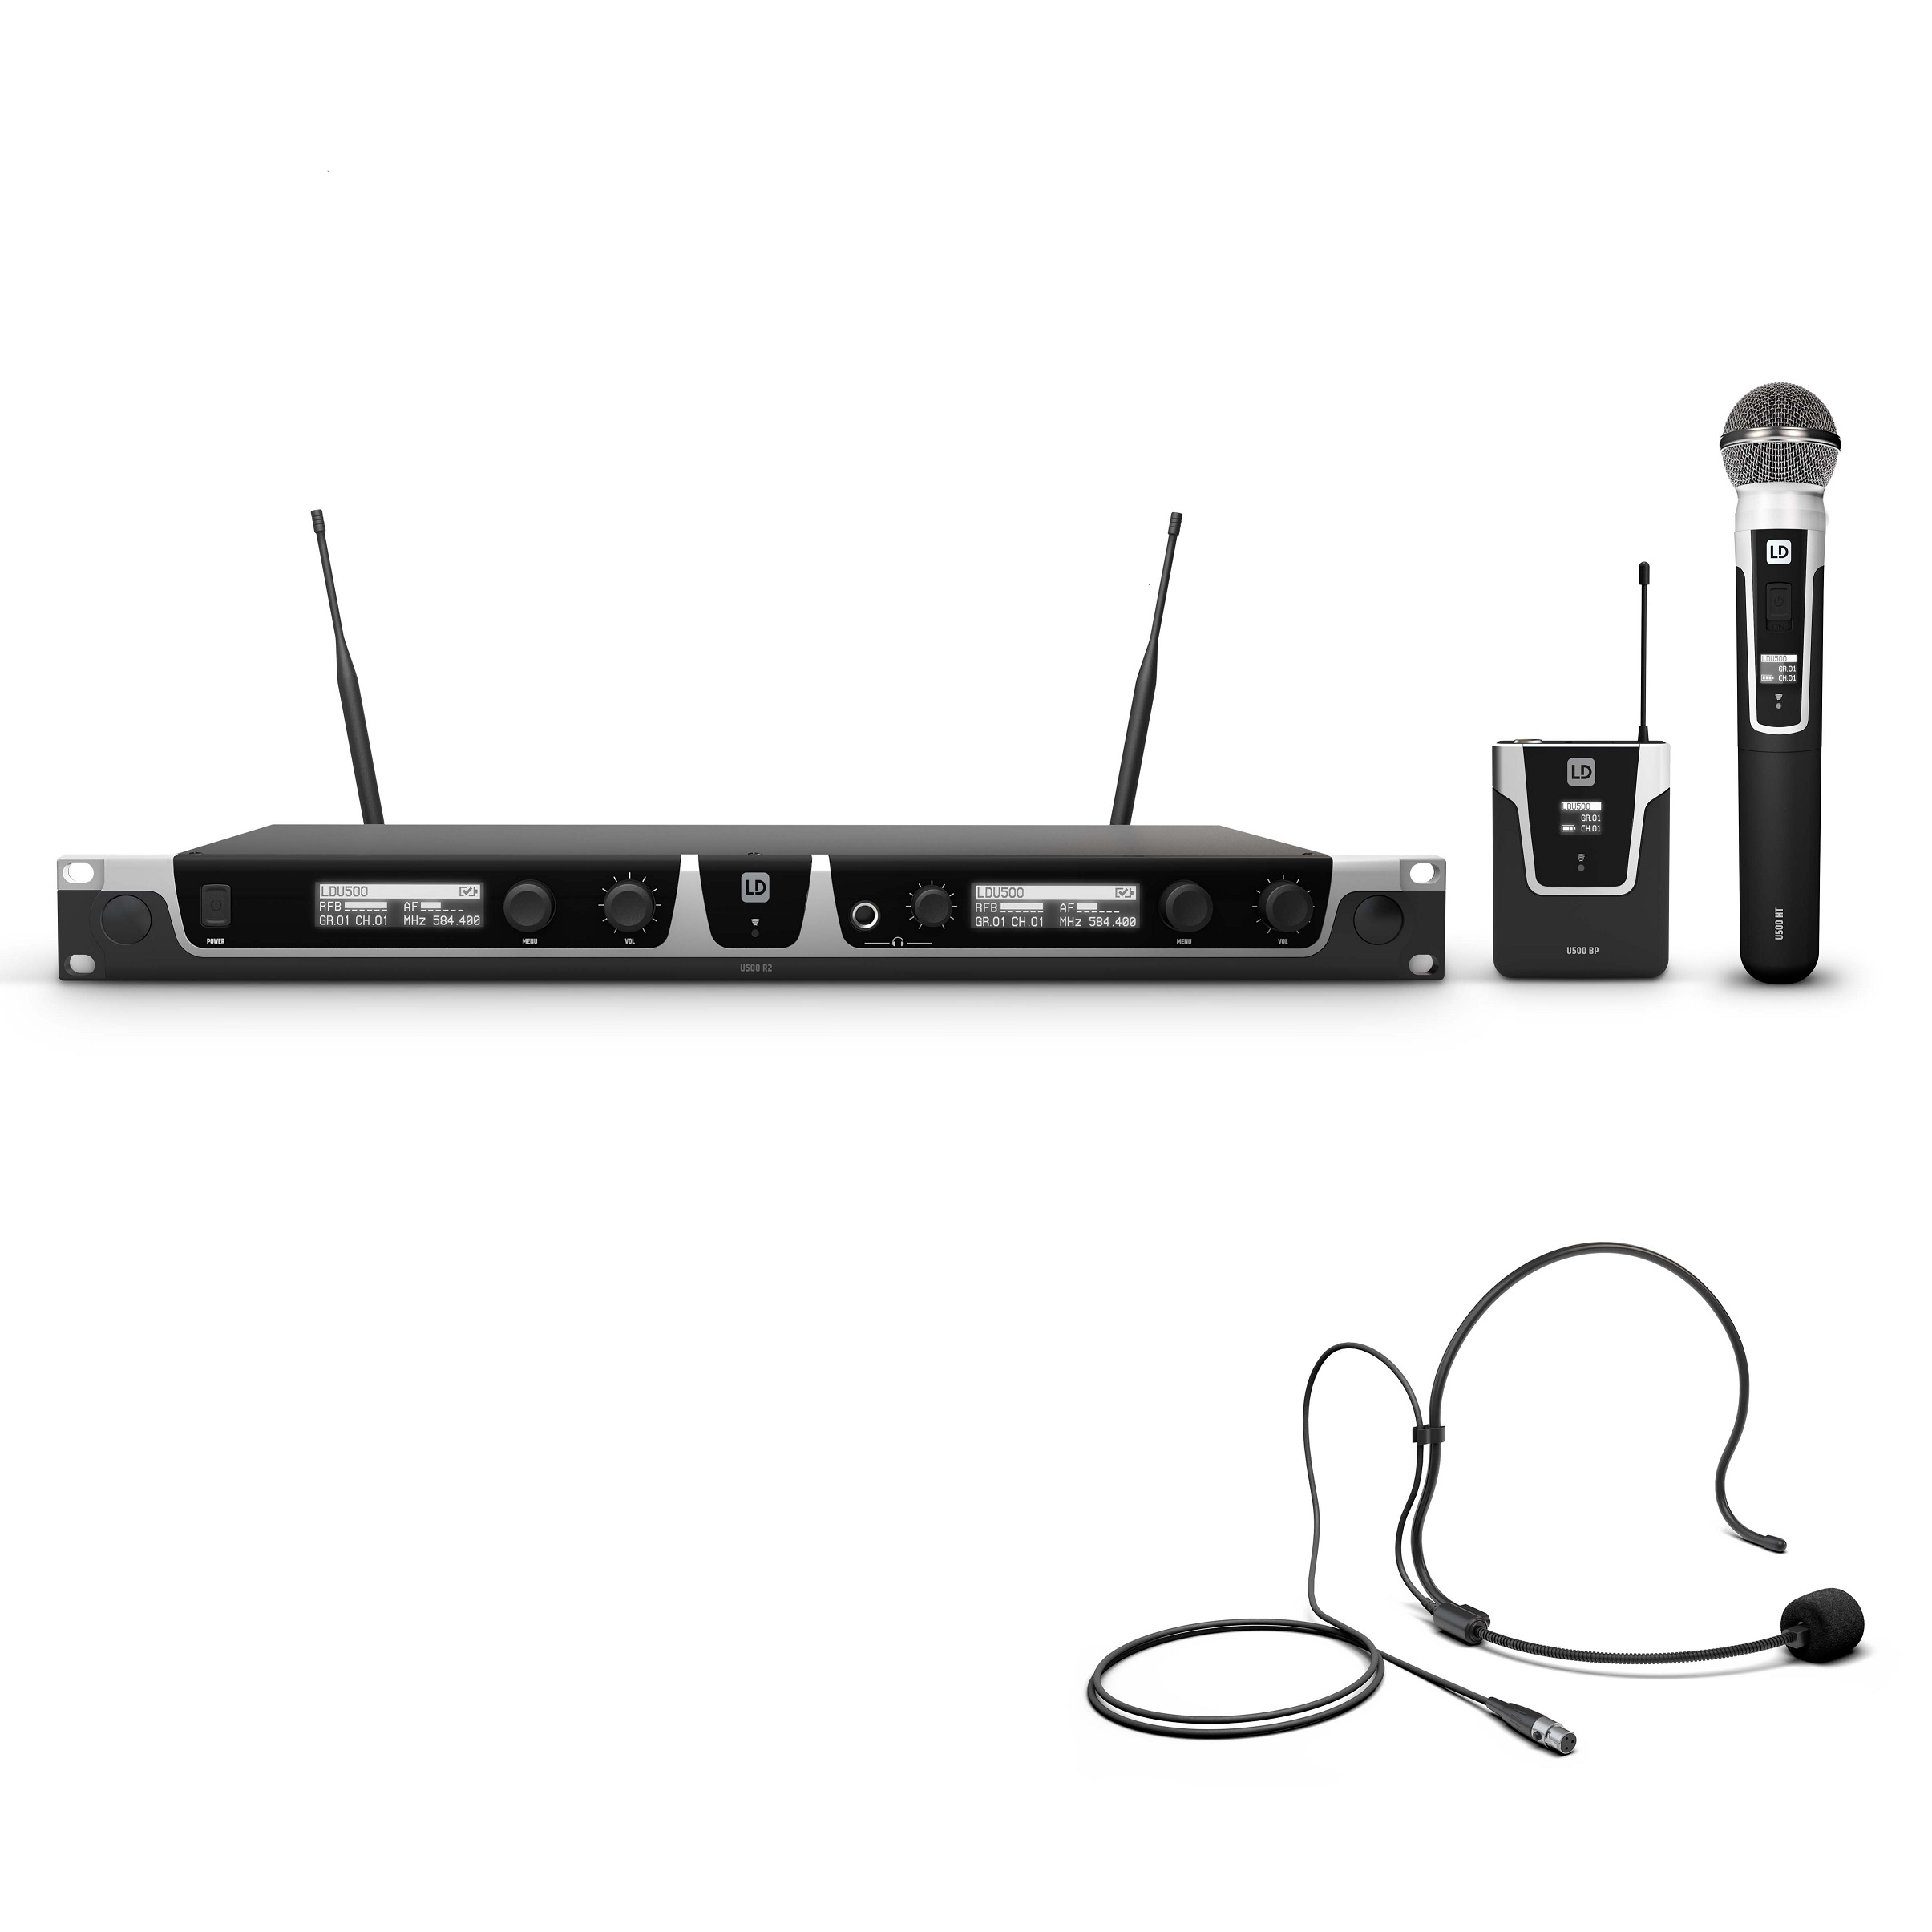 ld-systems-u505-hbh-2--wireless-microphone-system-with-bodypack-headset-and-dynamic-handheld-microphone.jpg